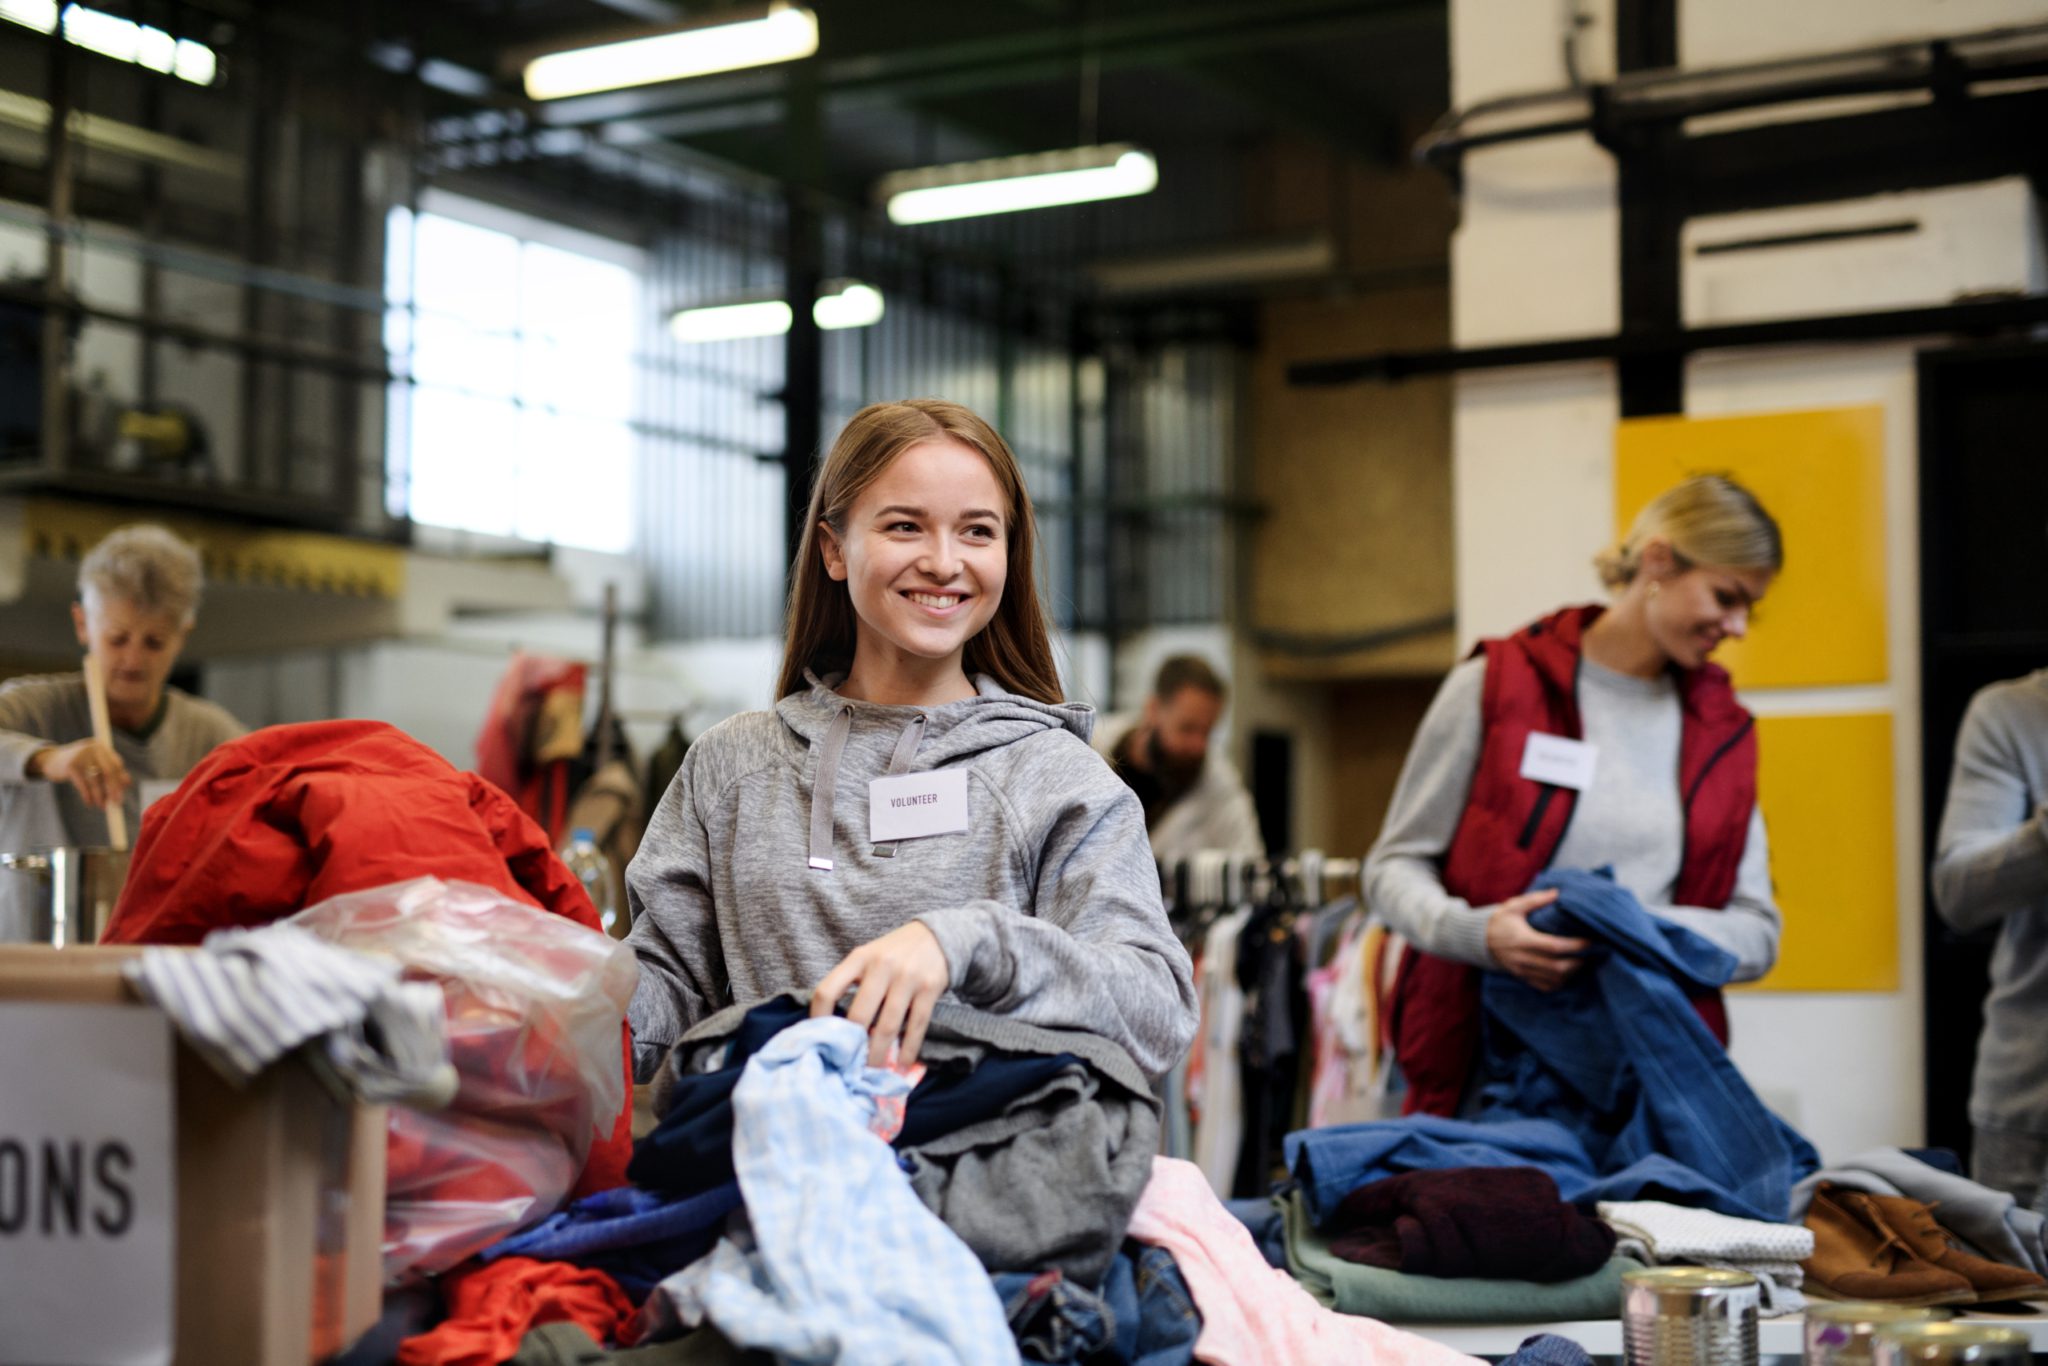 A volunteer smiling while sorting through clothing donations.